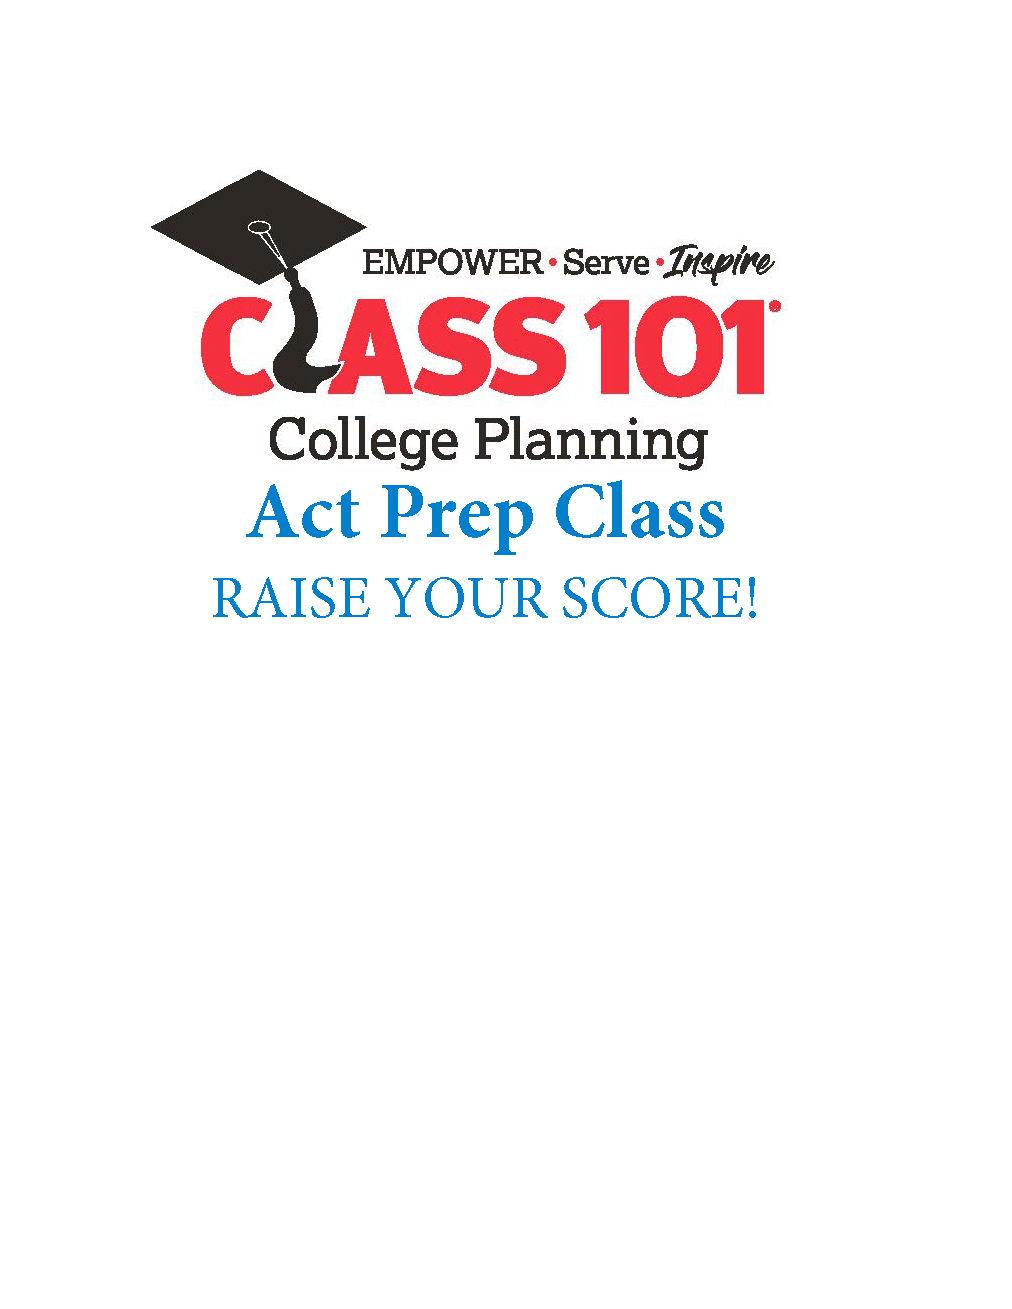 RAISE Your ACT Score! FREE ACT Consultation! ACT PREP CLASS - CALL TO REGISTER (805) 380-3302